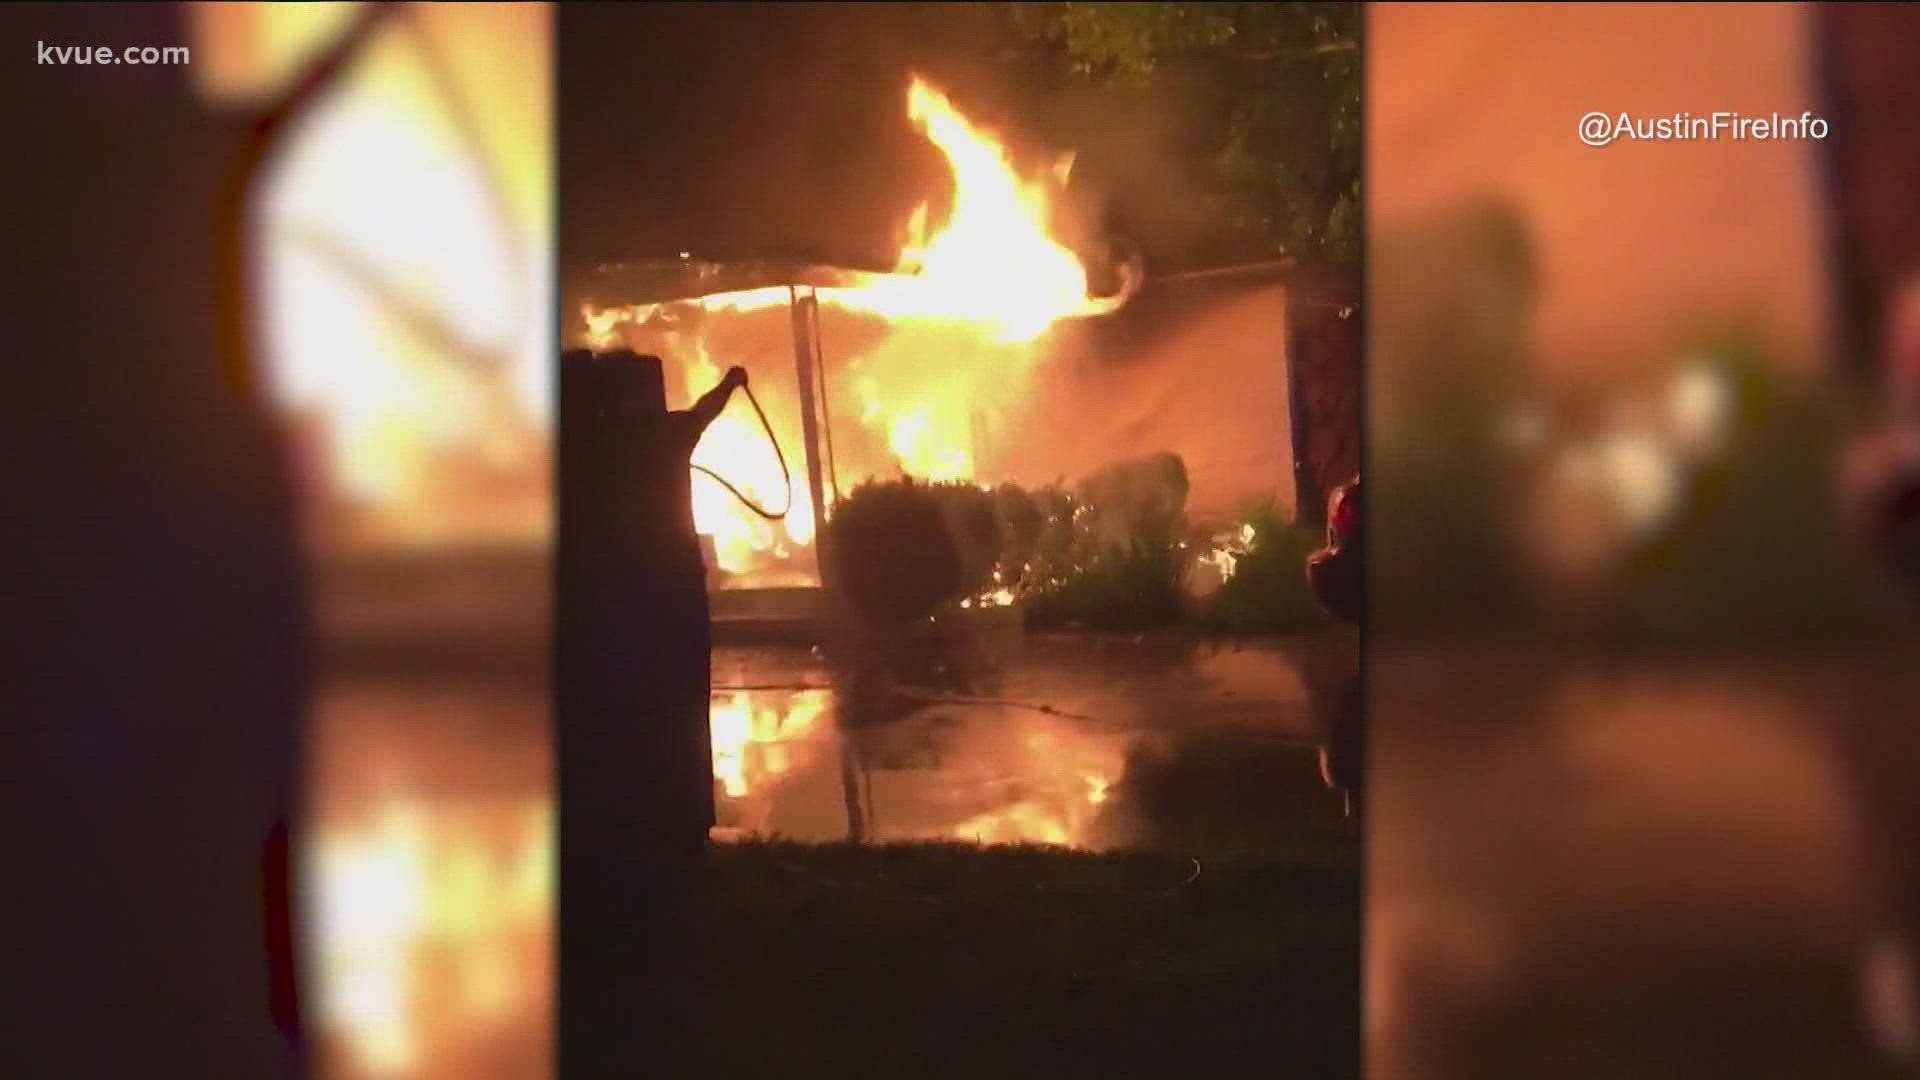 Two people and a dog are without a home after a house fire in North Austin.